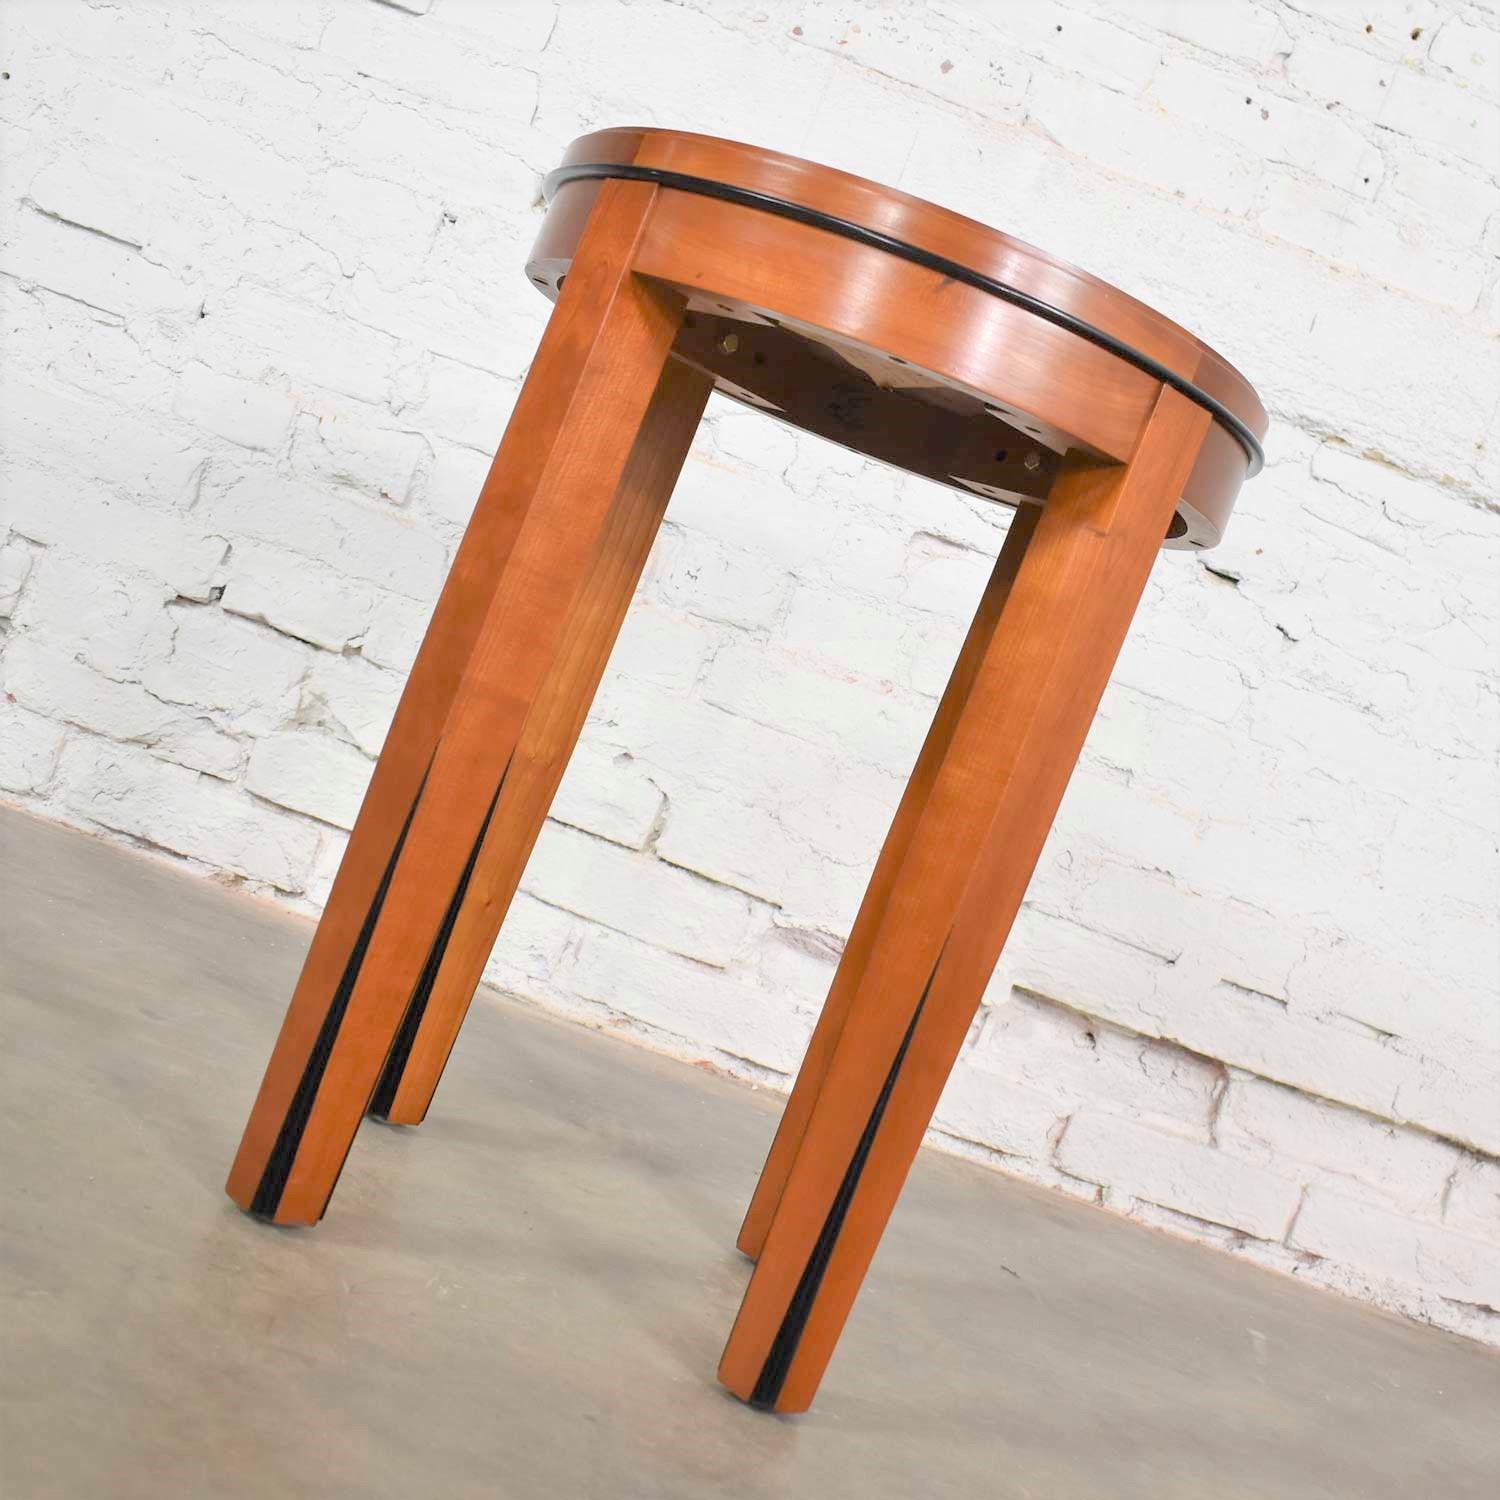 20th Century Small Round Art Deco Style Side Table or End Table by Hickory Business Furniture